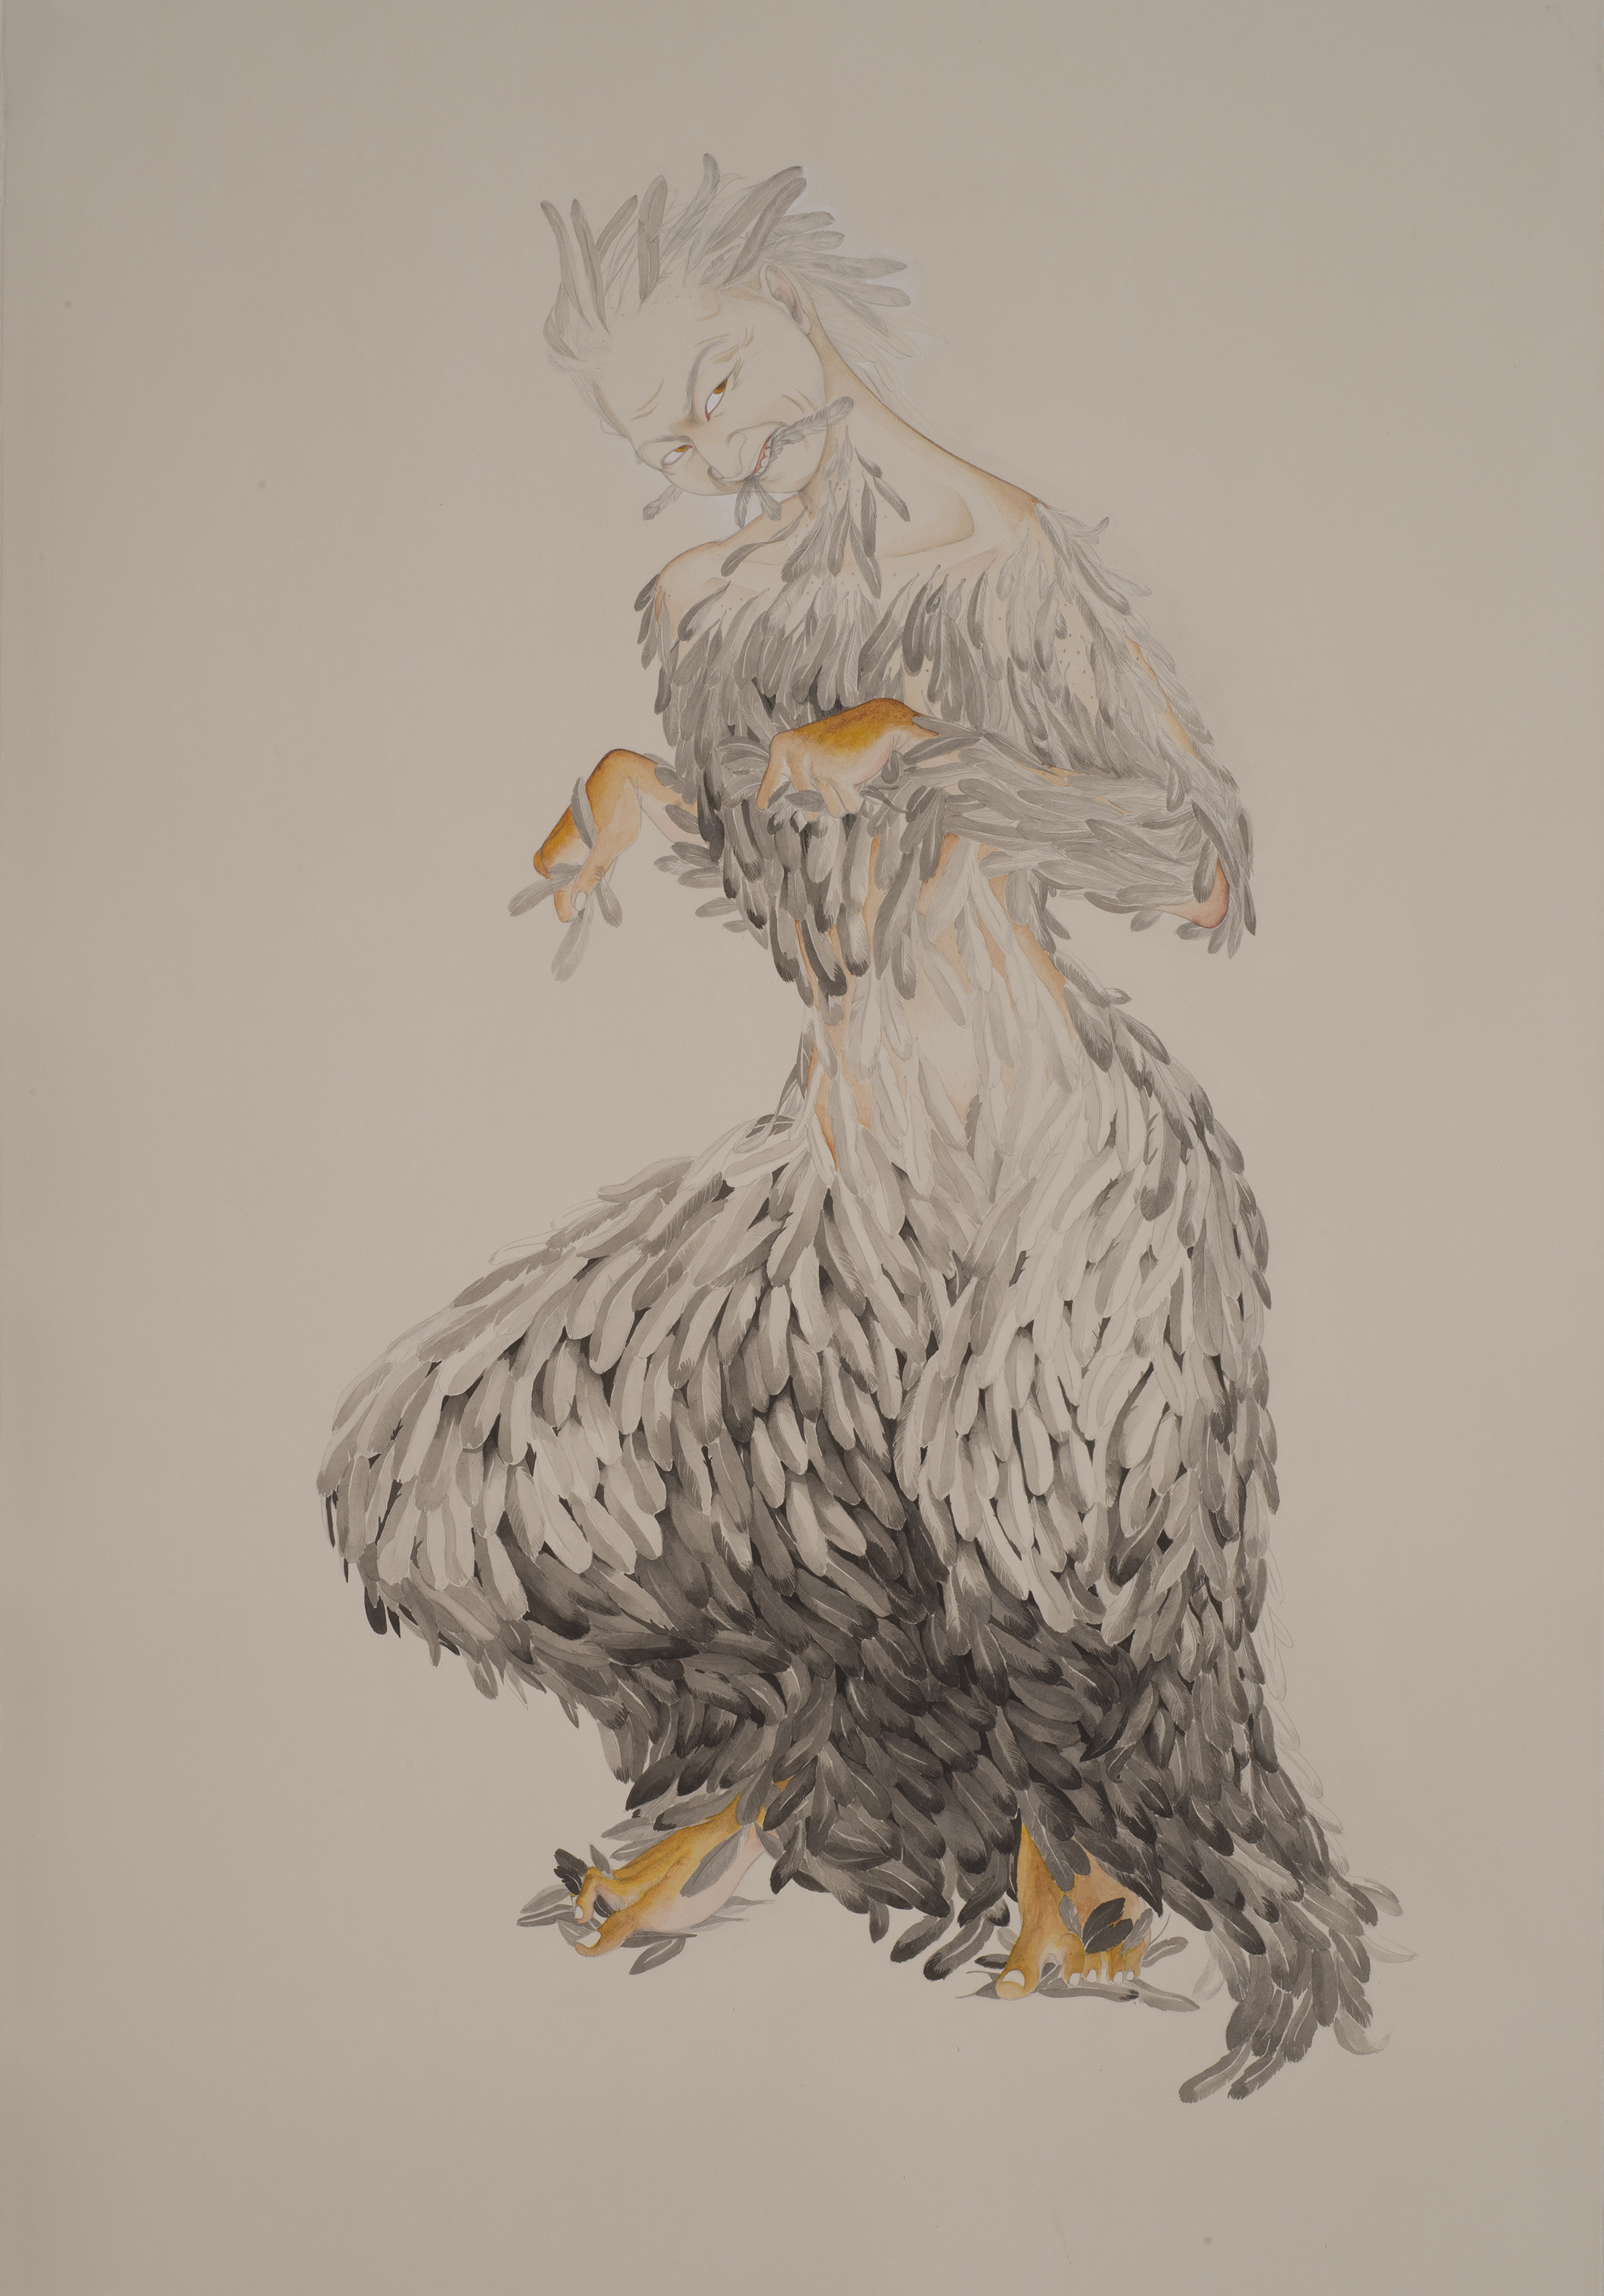   Preen , 2013 Graphite, watercolor, ink on ivory Fabriana Rosaspina 39 x 27.5 inches Photo: Bill Orcutt 